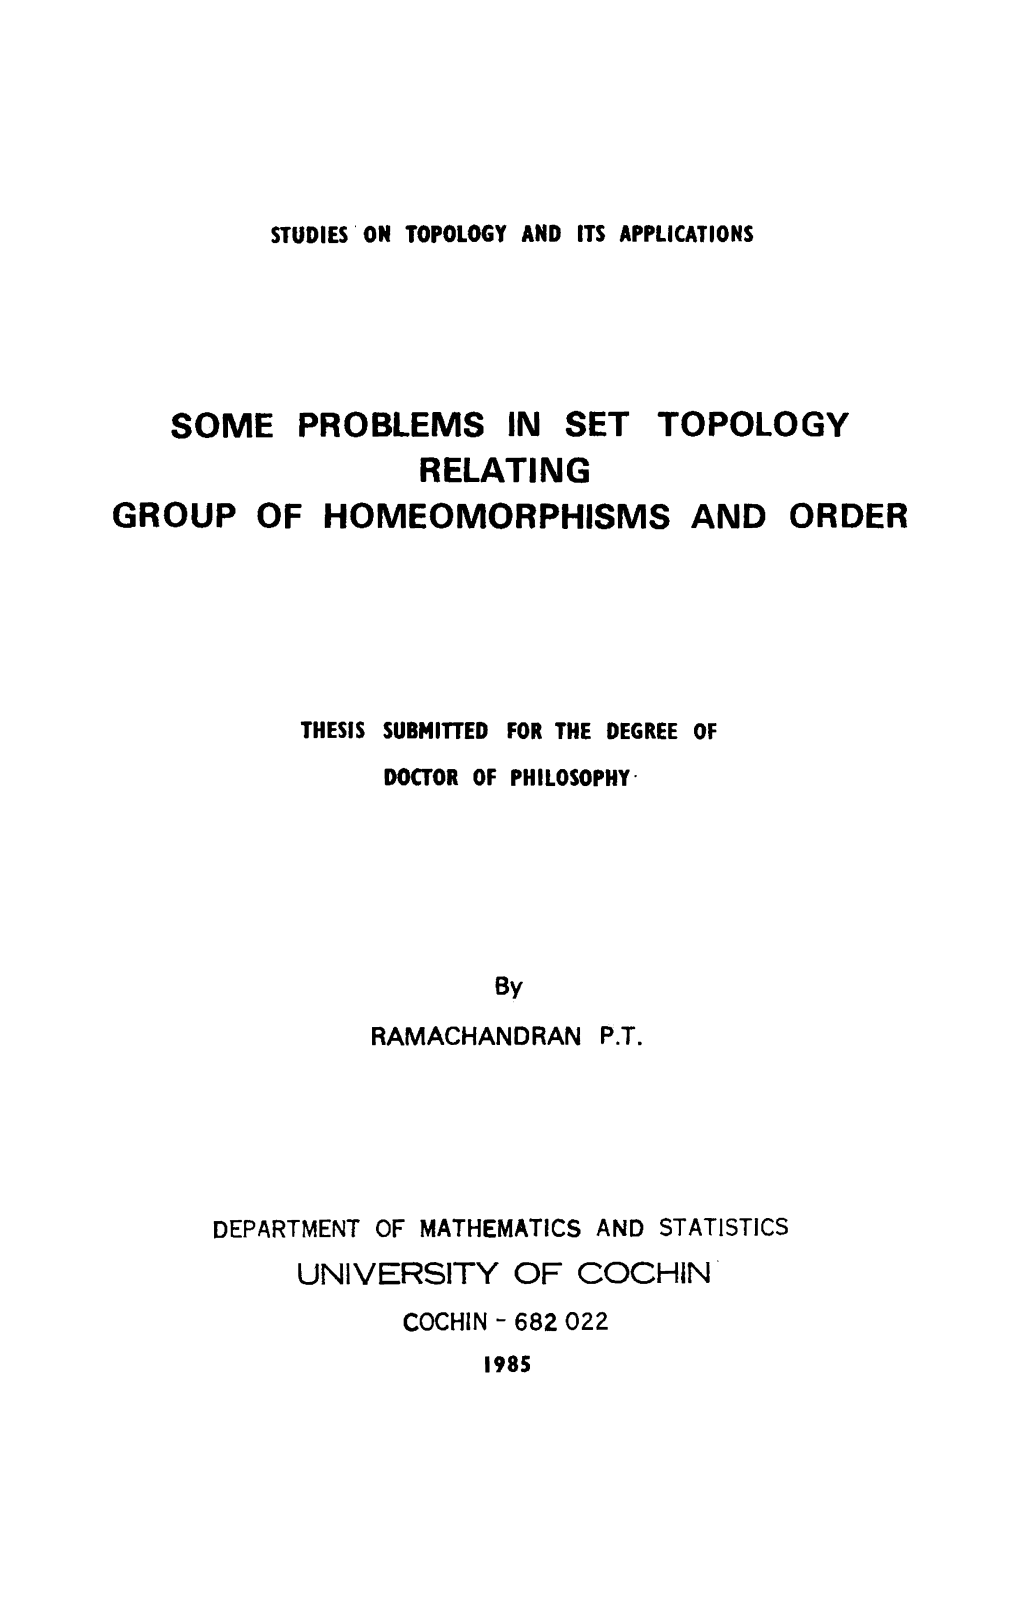 Some Problems in Set Topology Relating Group of Homeomorphisms and Order